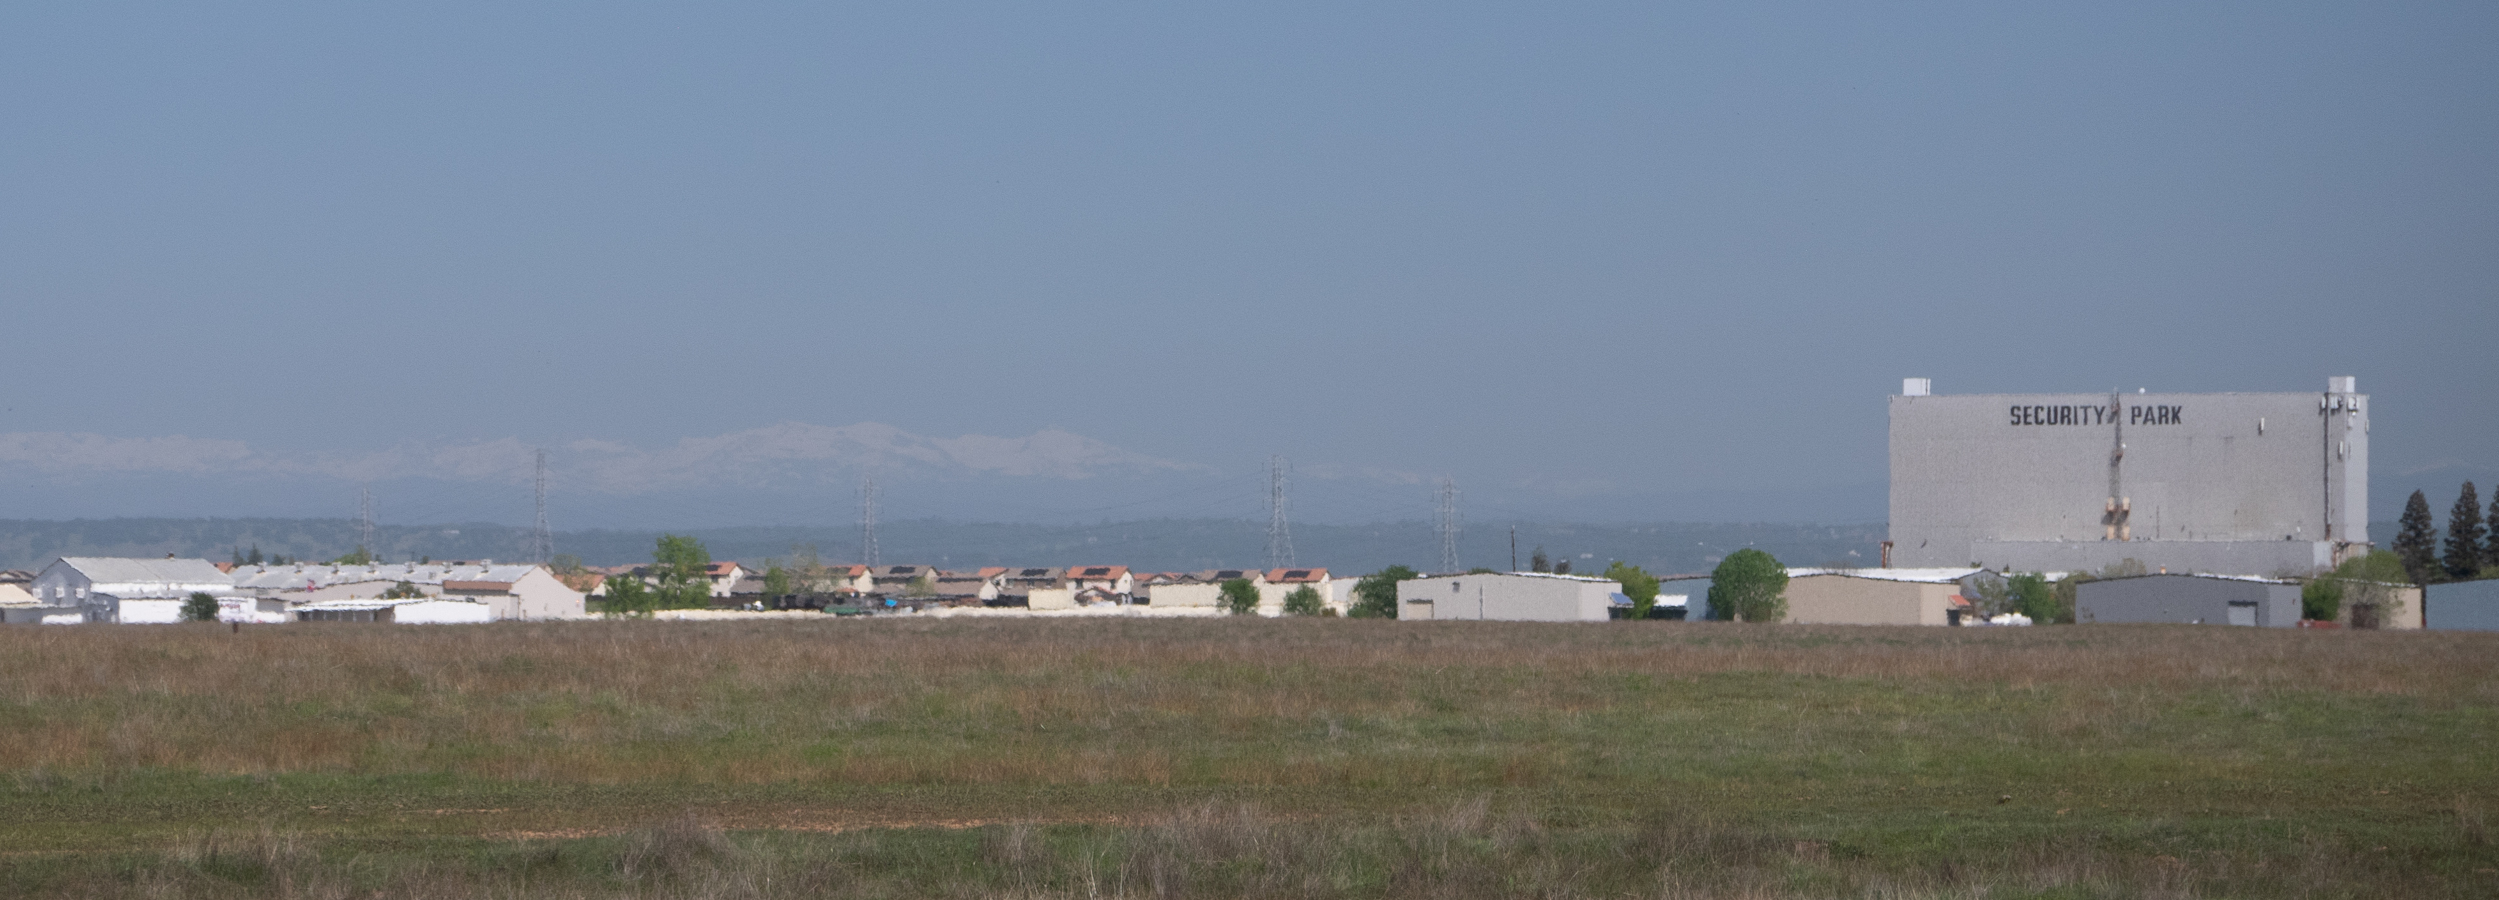 Security Park and the distant Sierra Nevada.